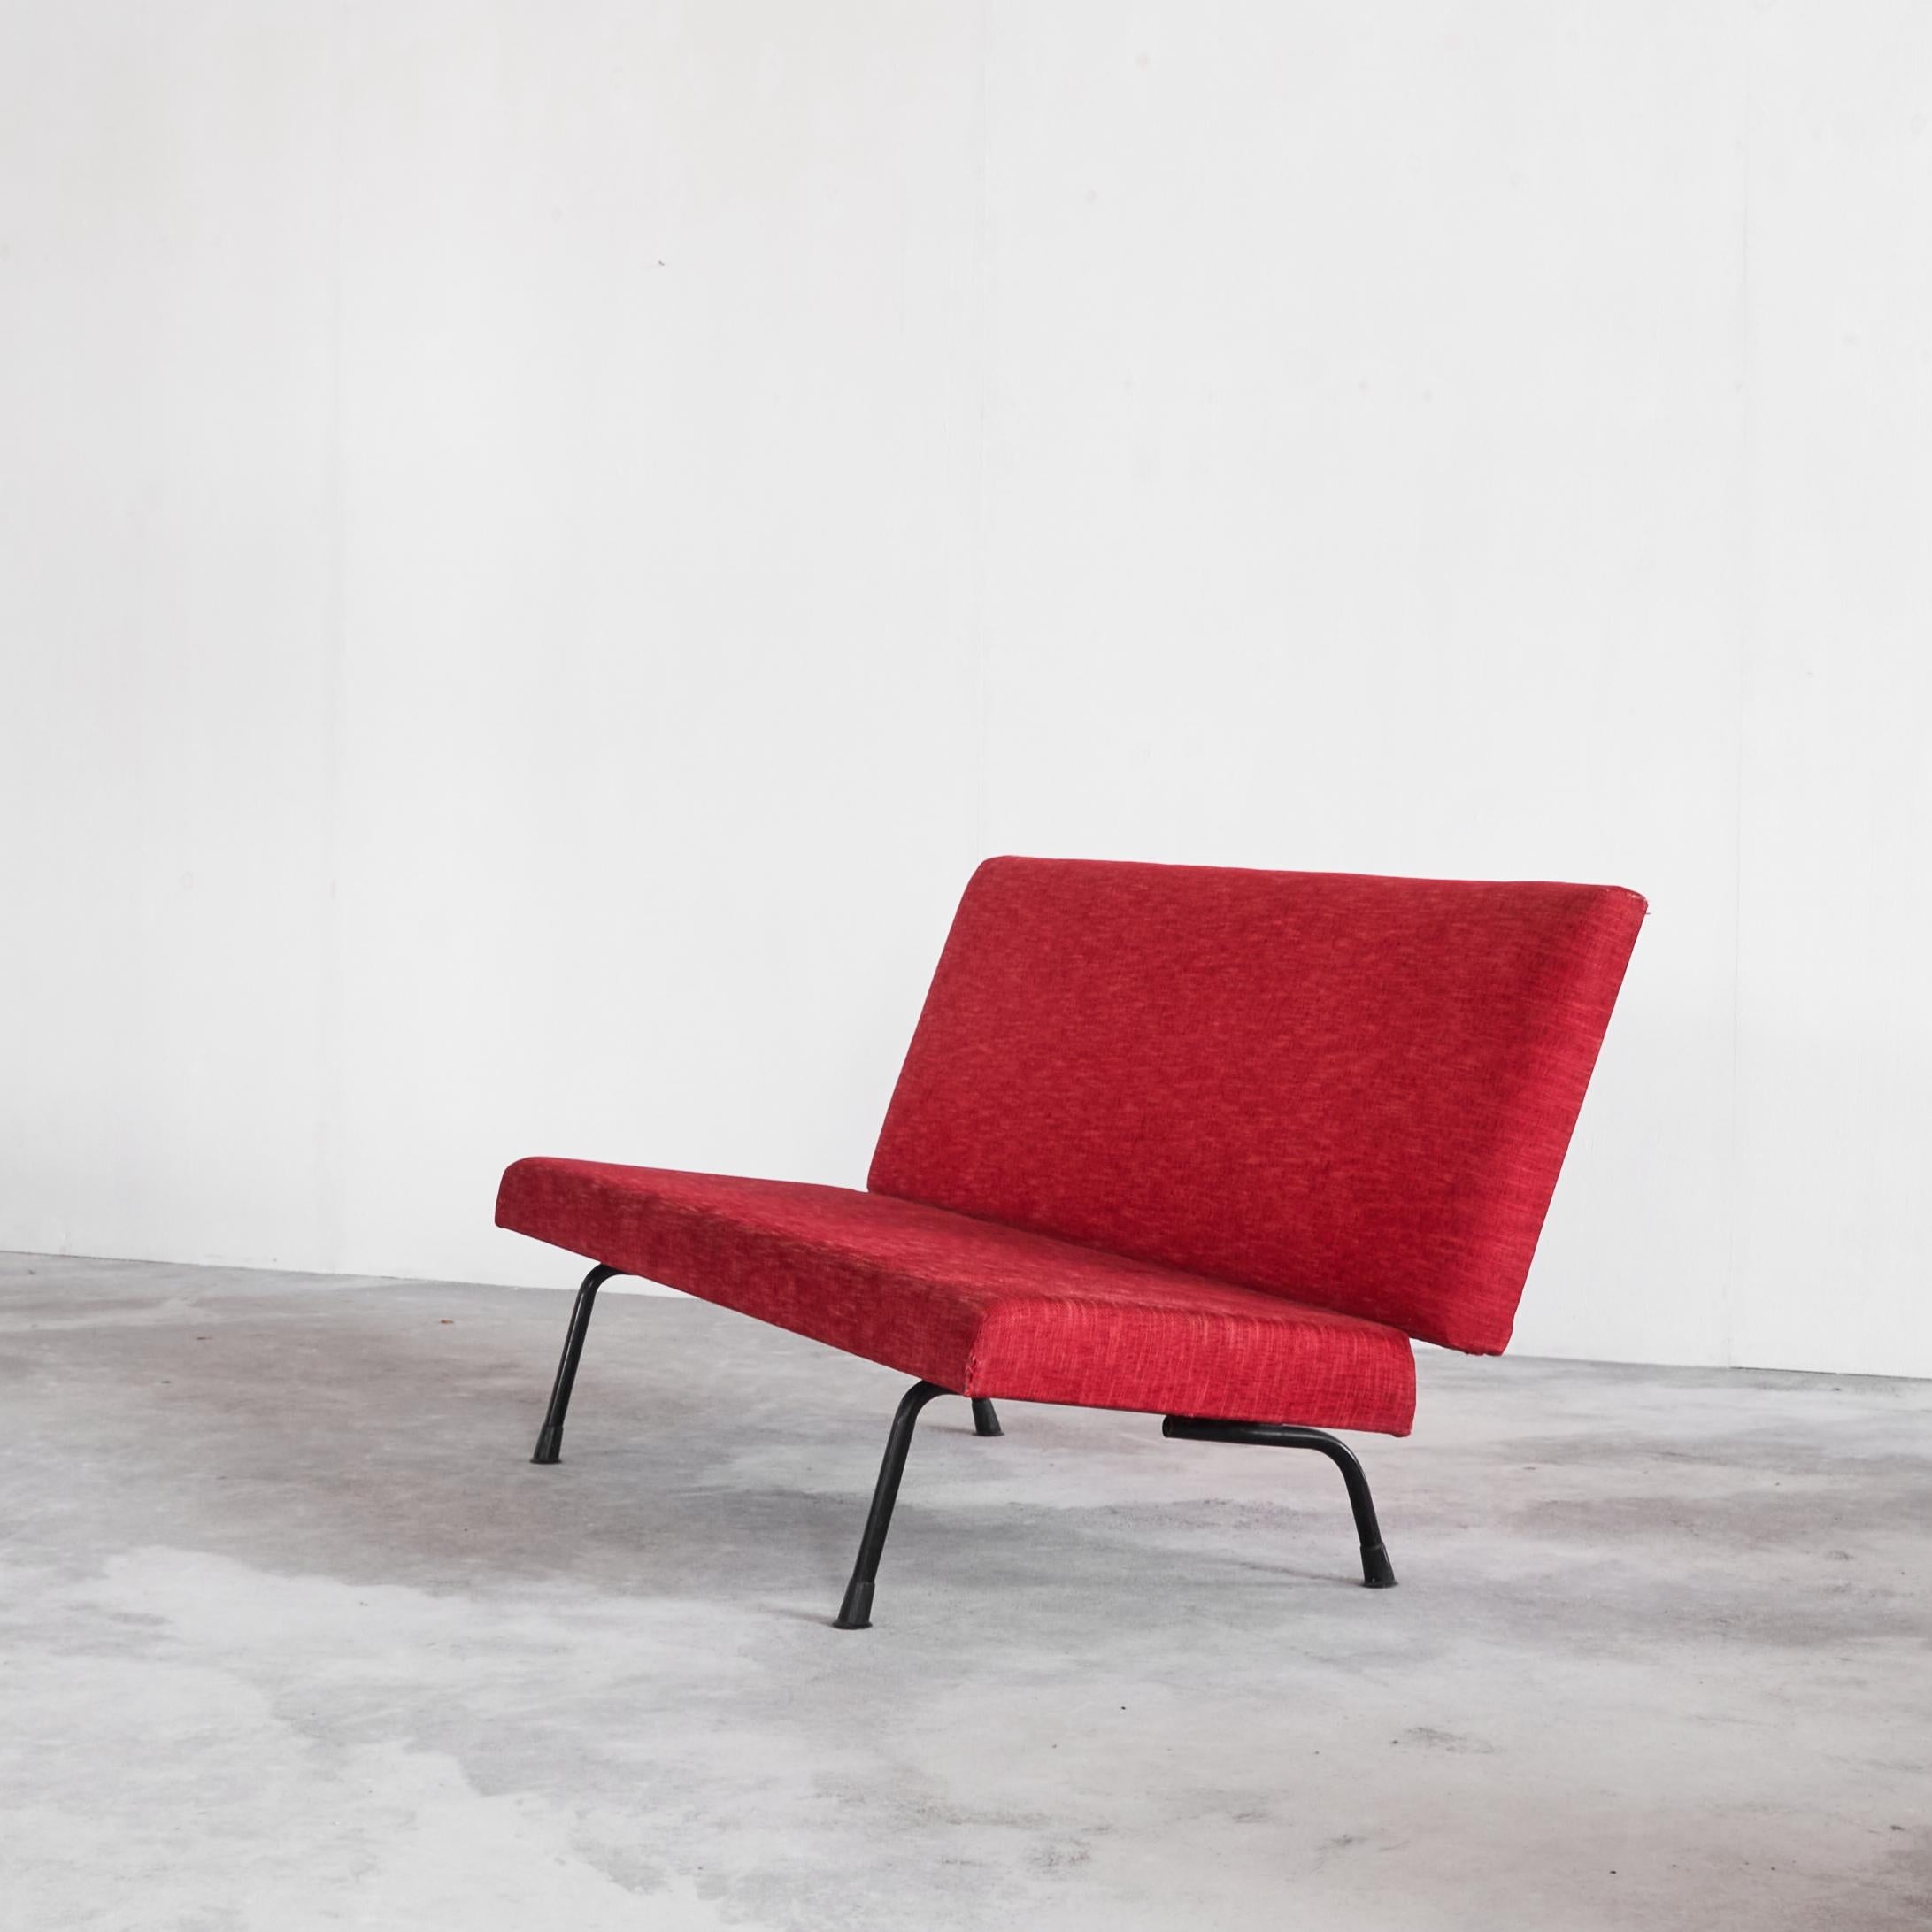 Wim Rietveld '447' Sofa in Red Fabric for Gispen, The Netherlands, 1950s.

Beautiful simple and straightforward design by Wim Rietveld for Gispen in the 1950s. Upholstered in a red fabric, this sofa mostly demands attention by its color. The design